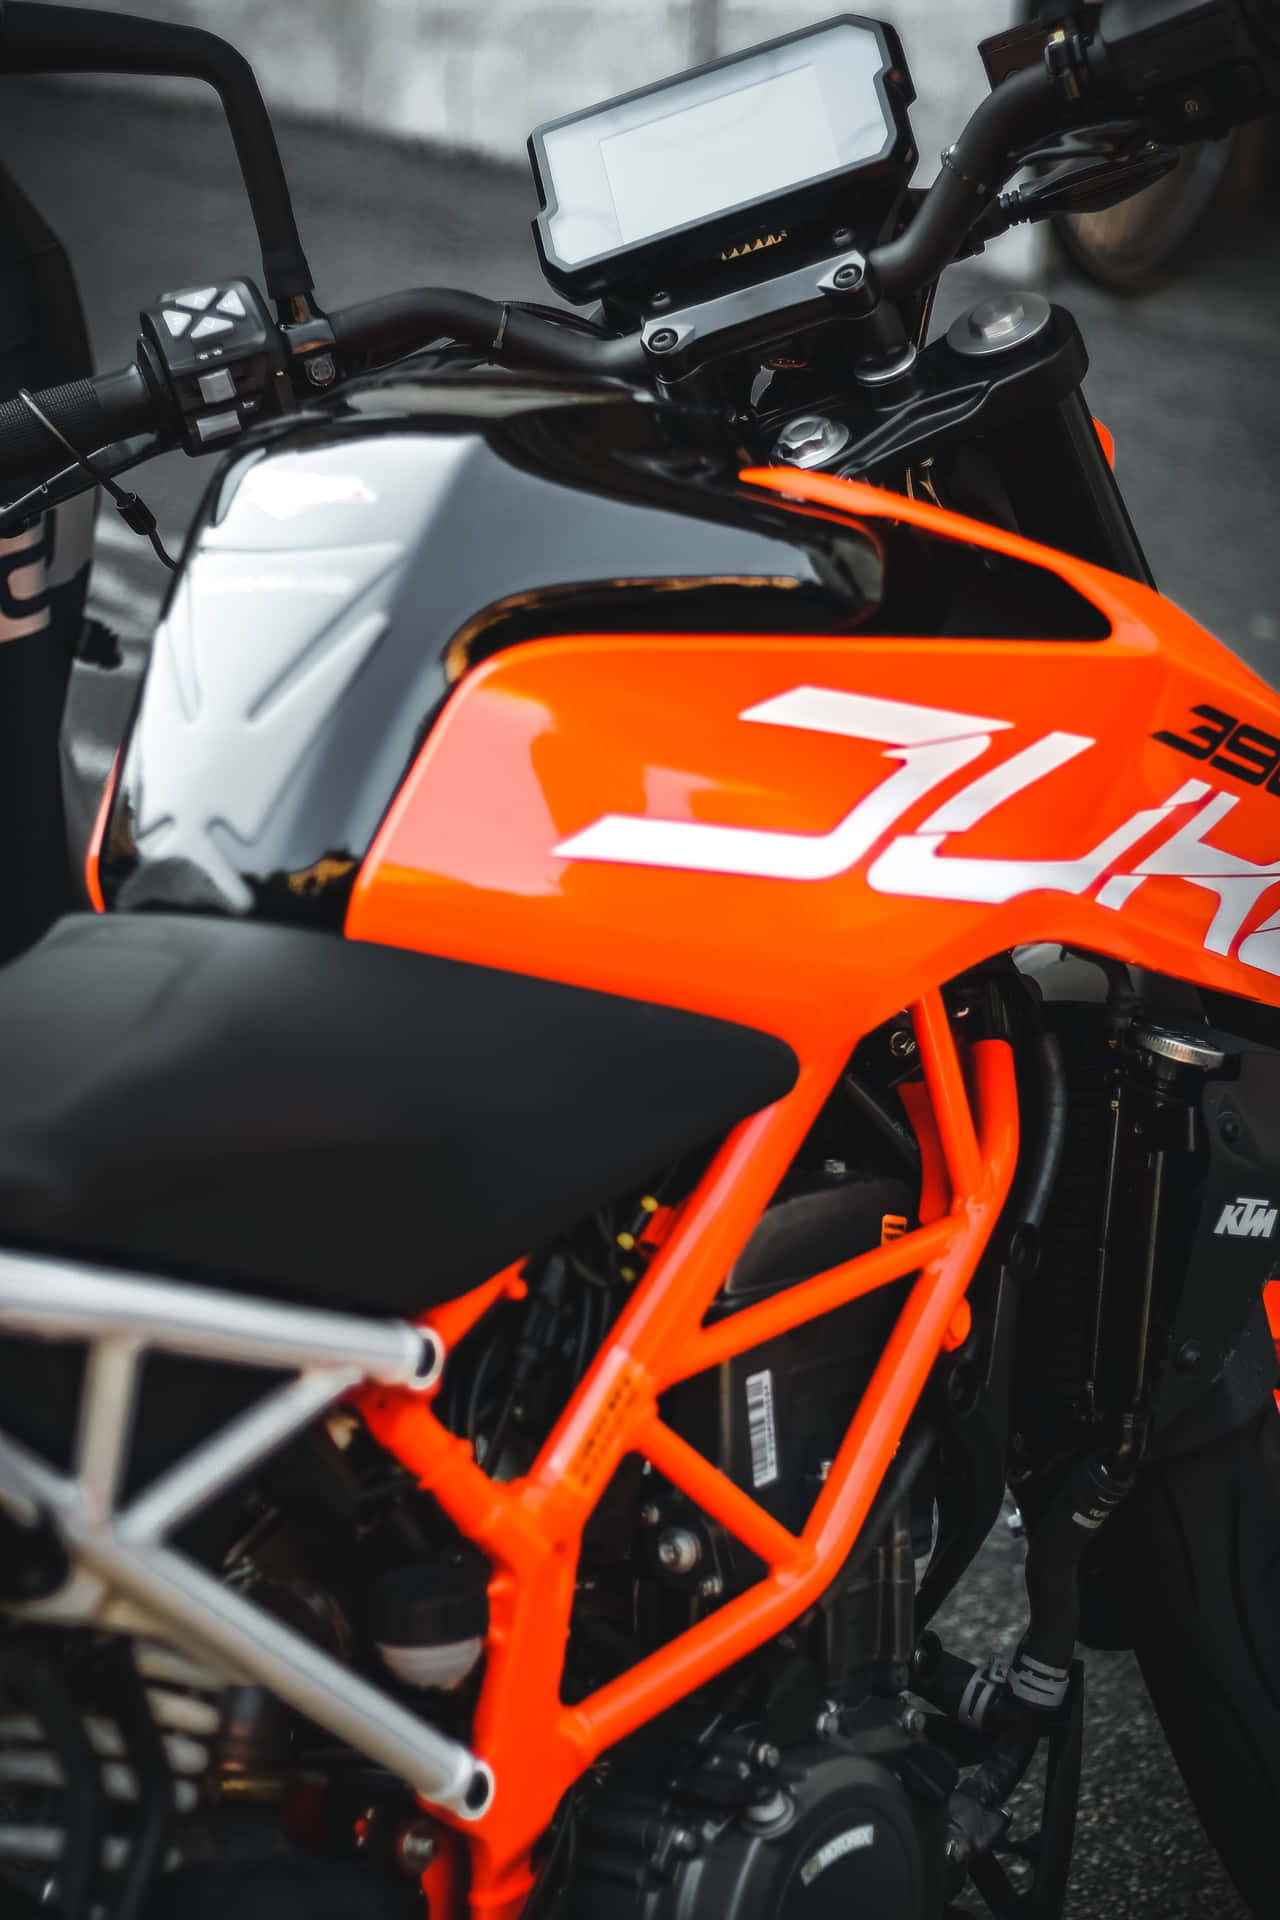 A Motorcycle With An Orange And Black Paint Job